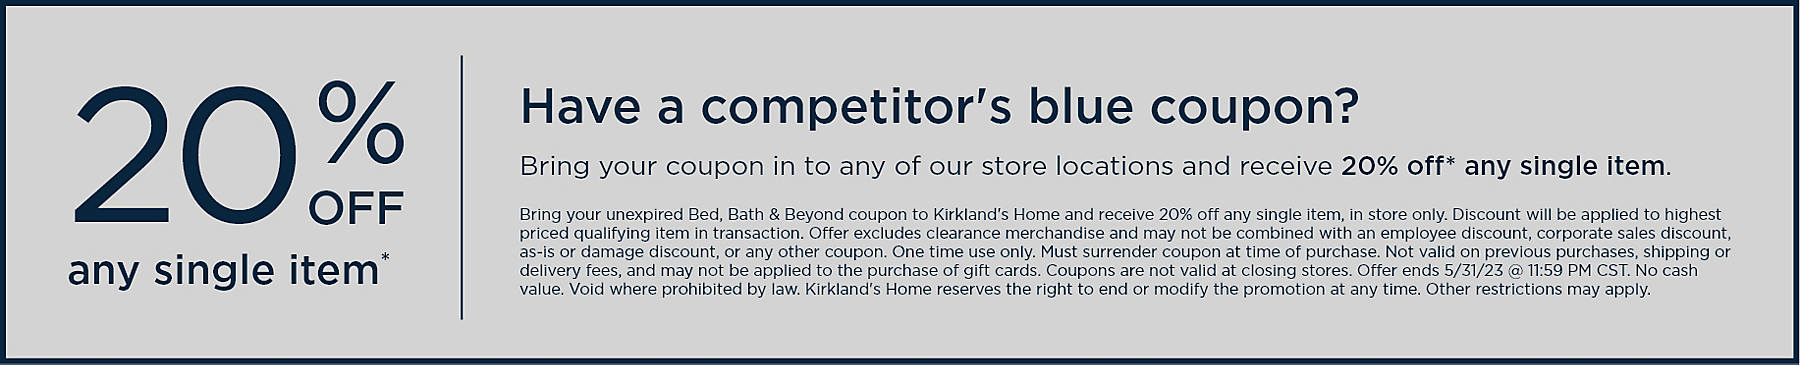 25% off any single item* Have a competitor's blue coupon? Bring your coupon in to any of our store locations and receive 25% off* any single item. Bring your unexpired Bed, Bath & Beyond coupon to Kirkland's Home and receive 25% off any single item, in store only. Discount will be applied to highest priced qualifying item in transaction. Offer excludes clearance merchandise and may not be combined with an employee discount,corporate sales discount, as-is or damage discount, or any other coupon. One time use only. Must surrender coupon at time of purchase. Not valid on previous purchases, shipping or delivery fees, and may not be applied to the purchase of gift cards. Coupons are not valid at closing stores. Offer ends 5/31/23 @ 11:59 PM CST. No cash value. Void where prohibited by law. Kirkland's Home reserves the right to end or modify the promotion at any time. Other restrictions may apply.